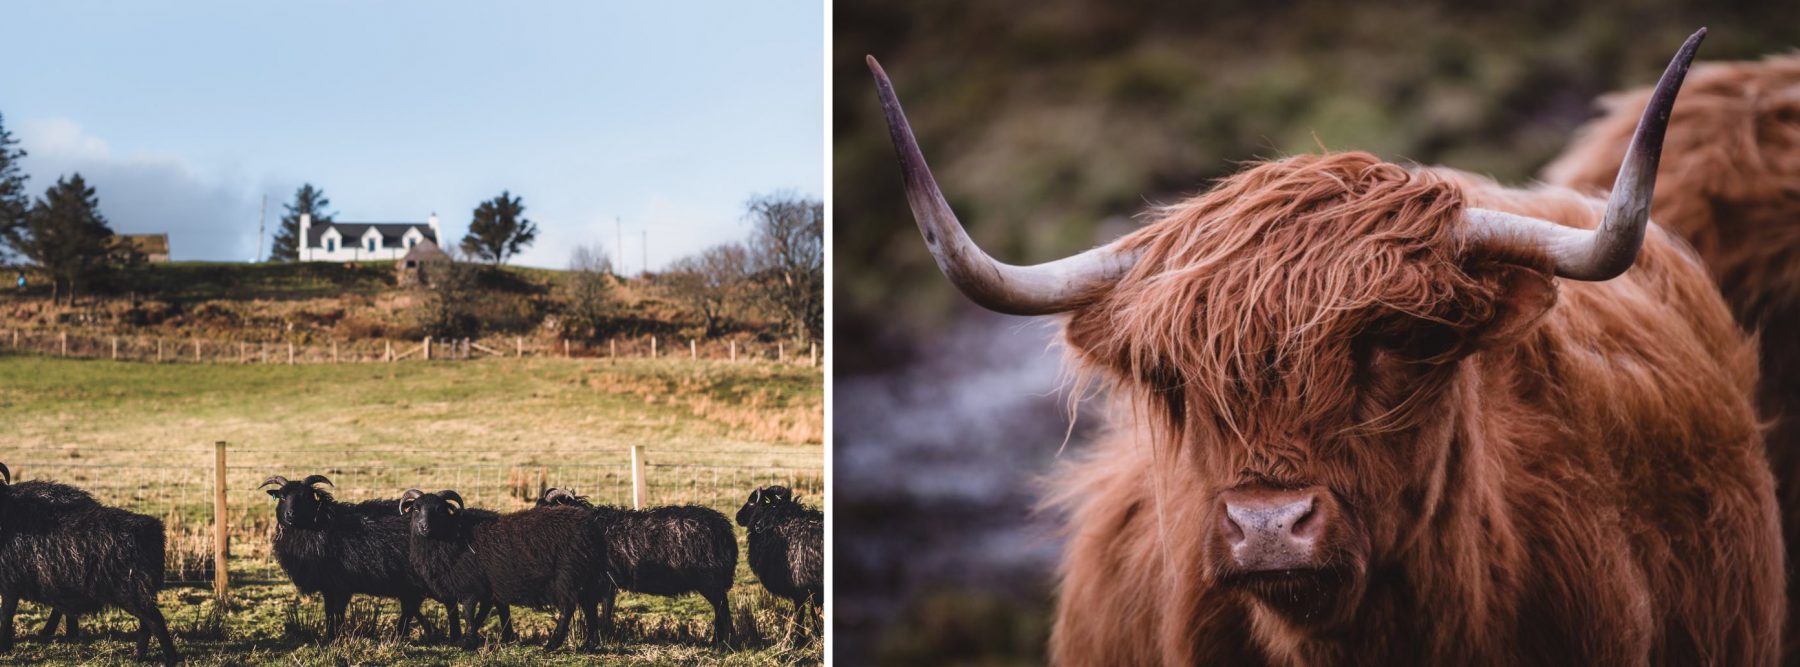 Meet our Hebridean sheep, brought to these parts we think by Norsemen centuries ago. Our neighbours. Highland Cattle are the quiet unassuming giants around these parts.